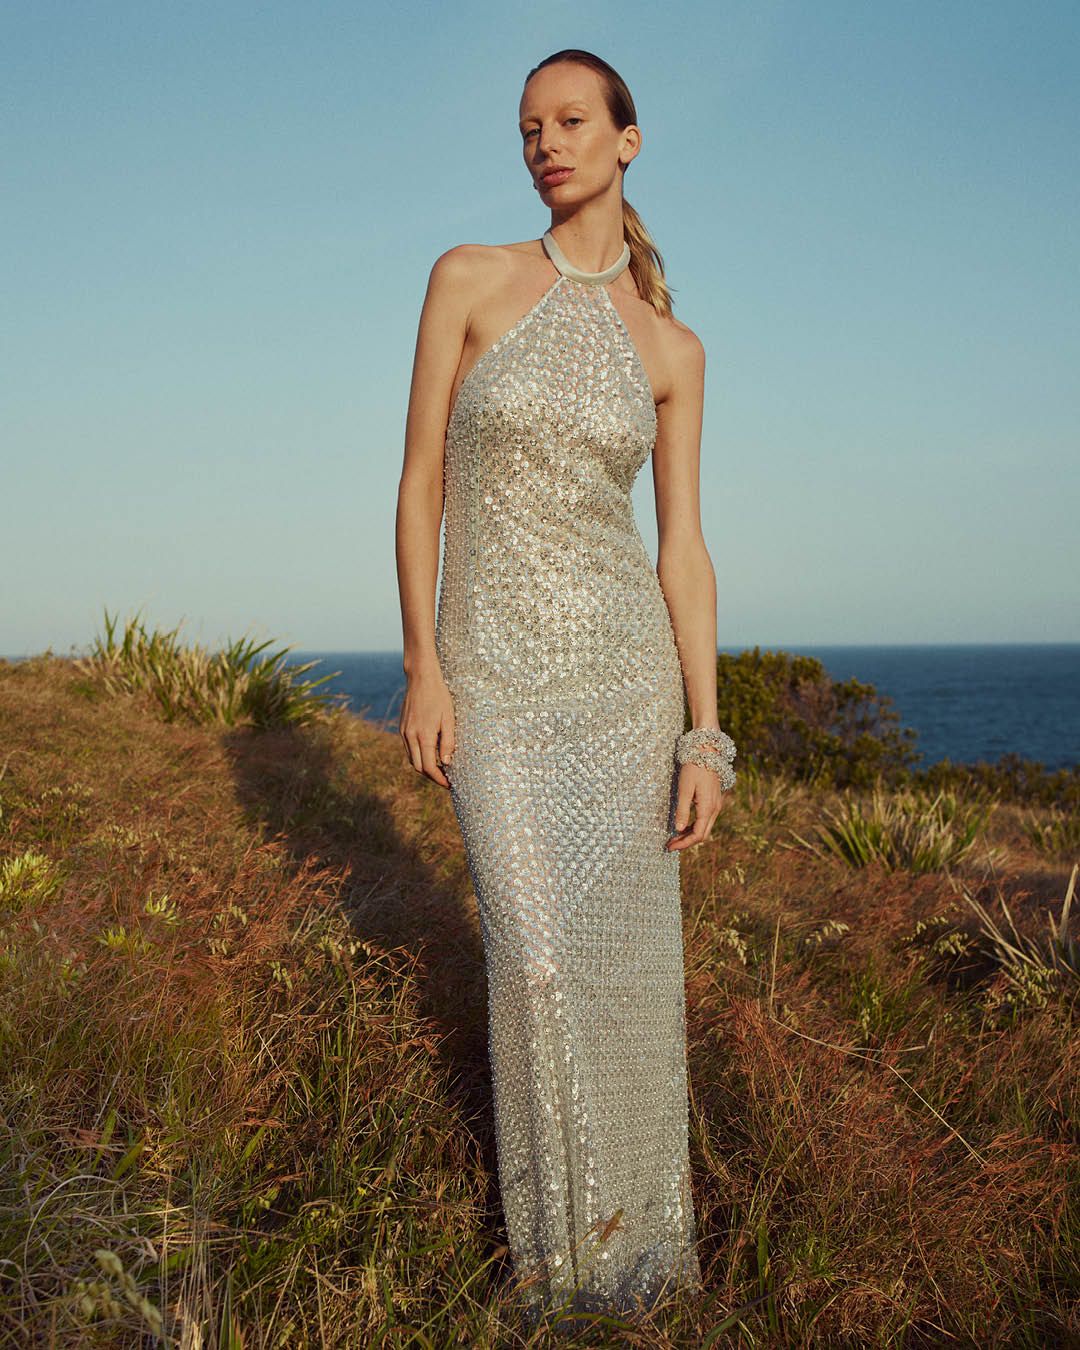 Blonde model wearing a silver sequined halterneck evening gown standing on the grass with the ocean in the background